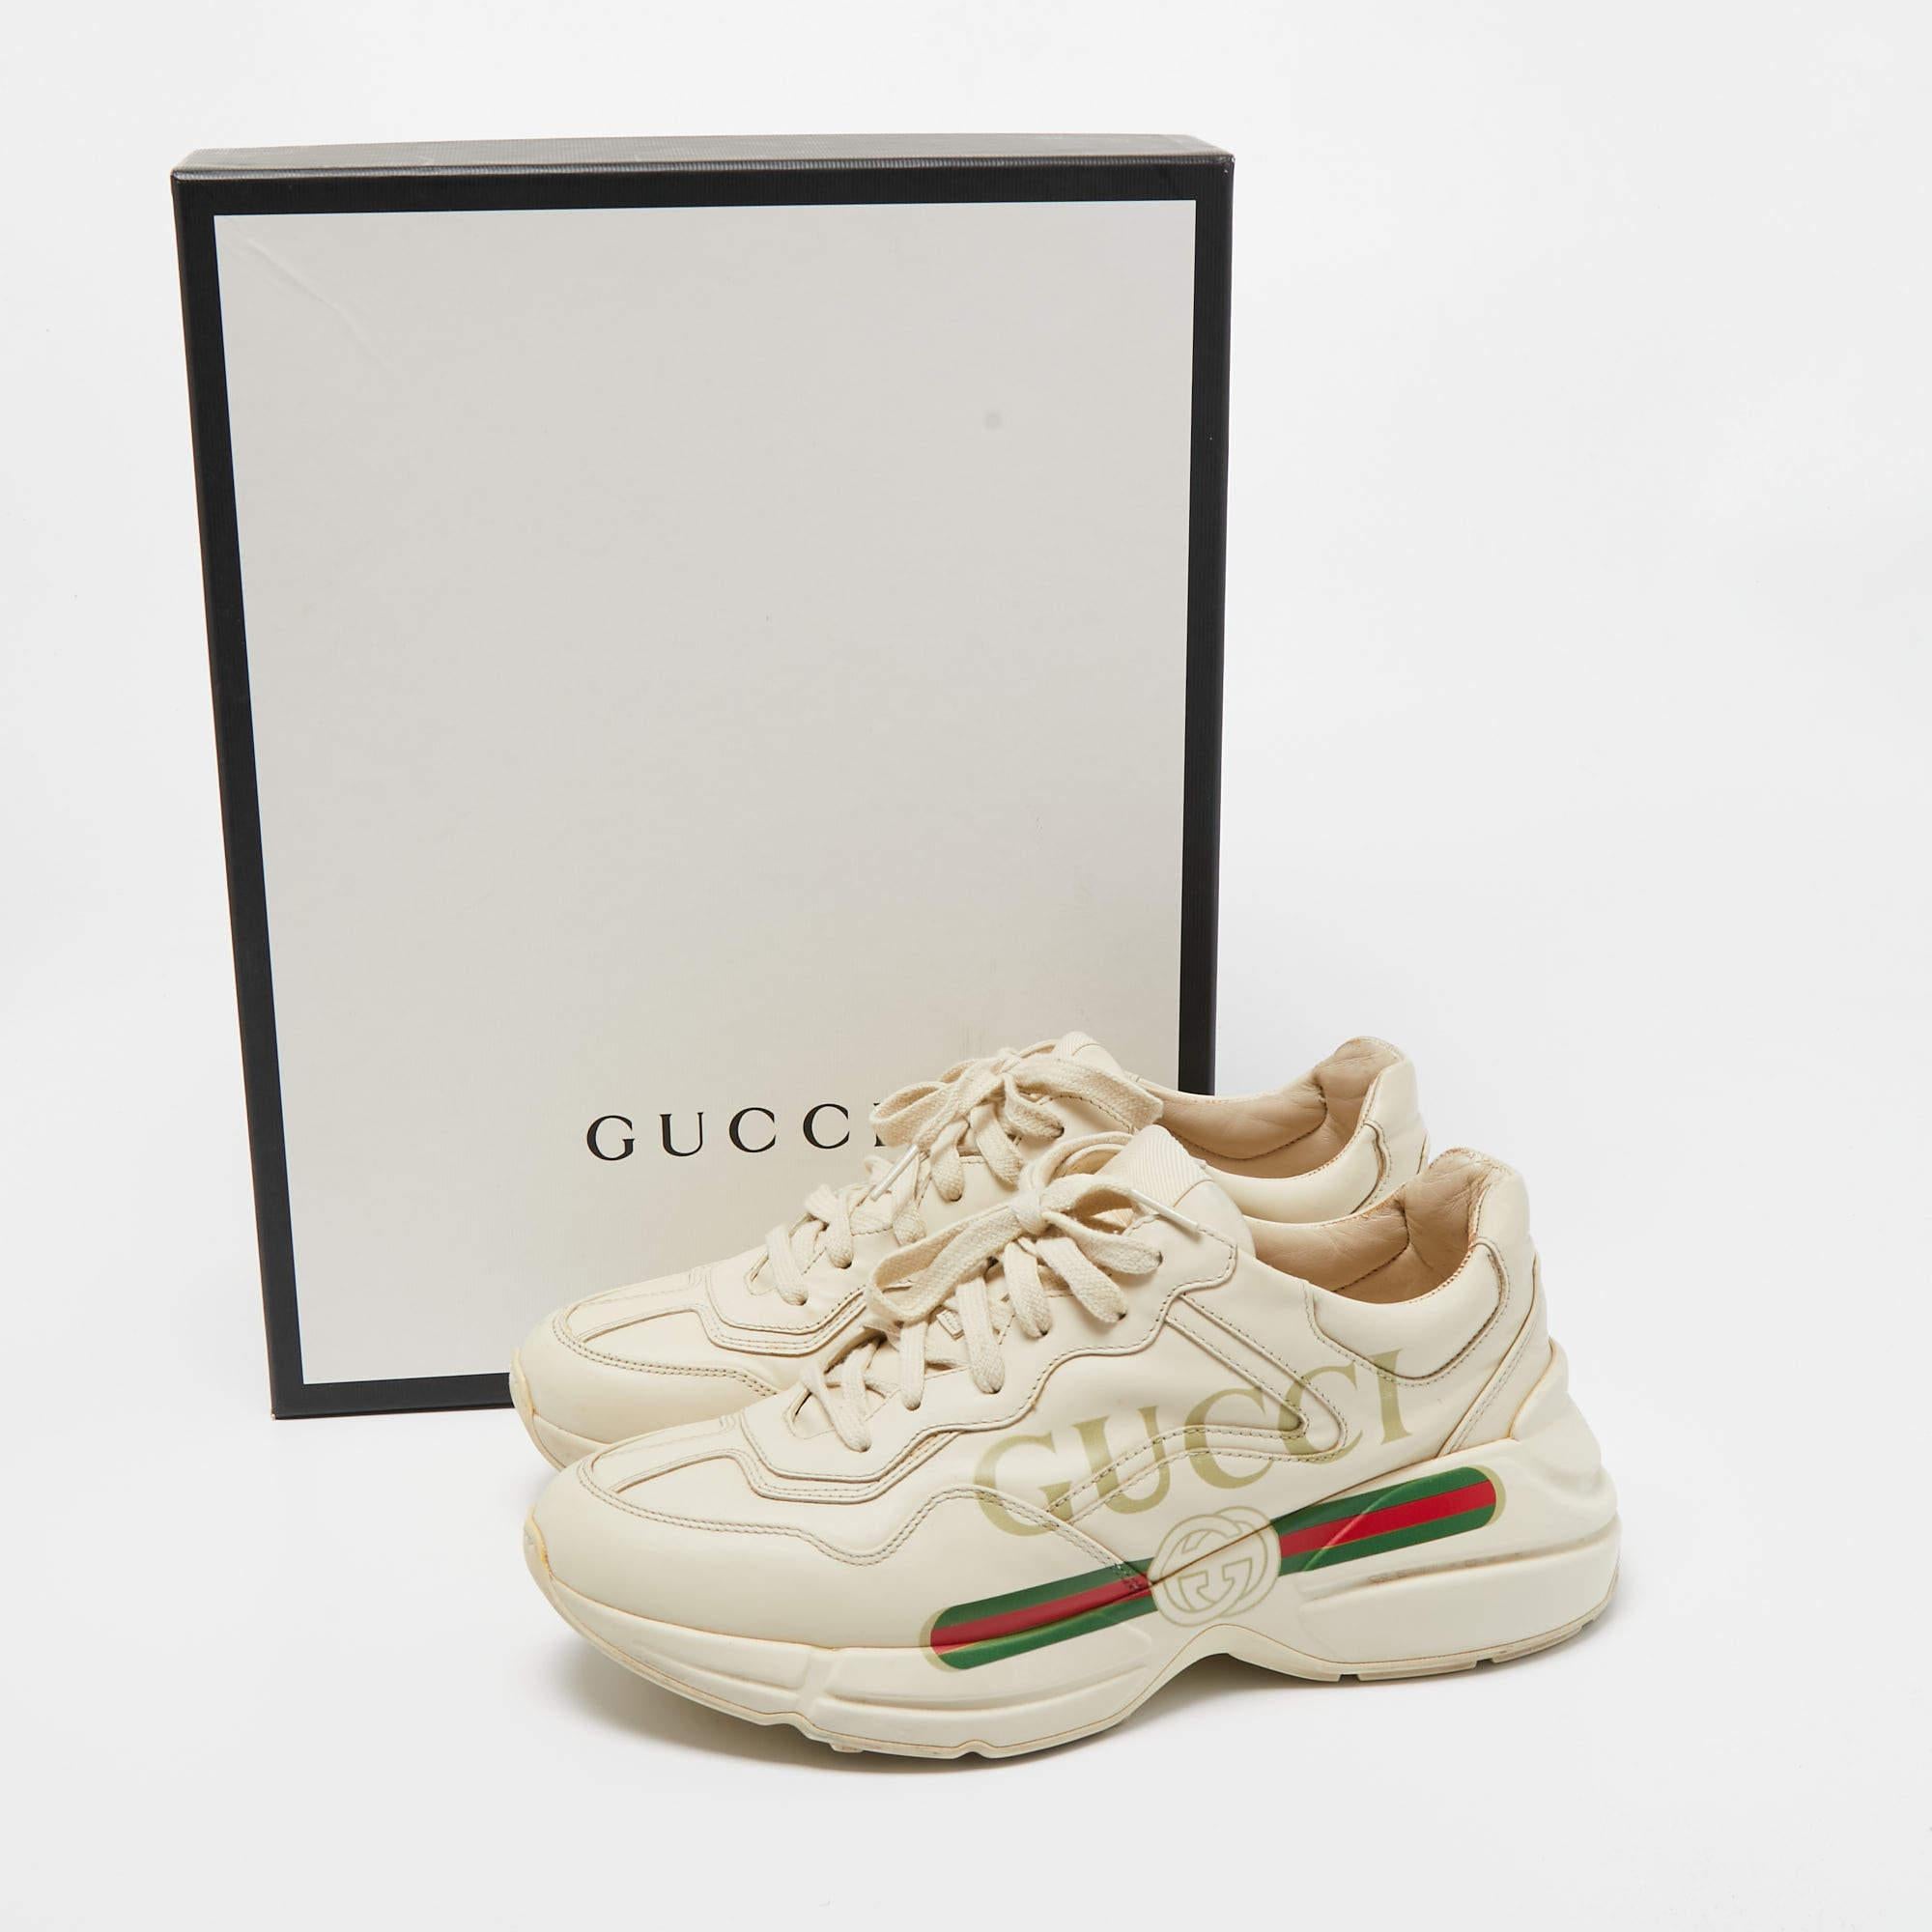 Gucci Cream Leather Rhyton Low Top Sneakers Size 40.5 5